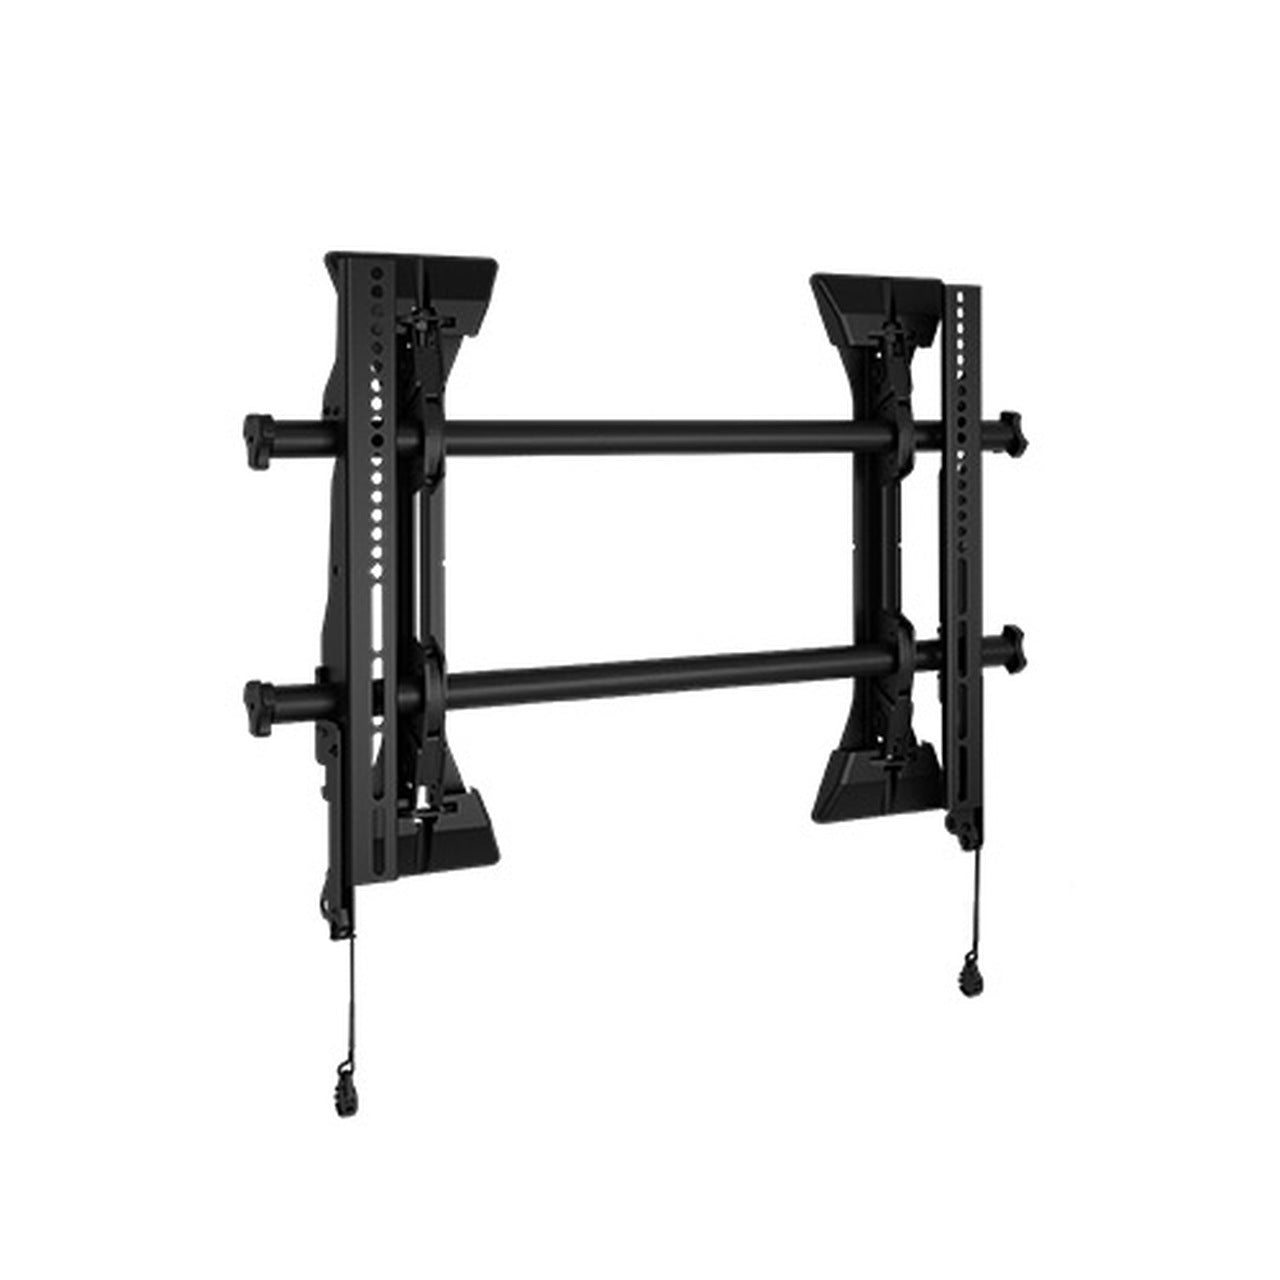 Chief MSM1U Fusion Series Fixed Wall Mount for 26 to 47" Displays